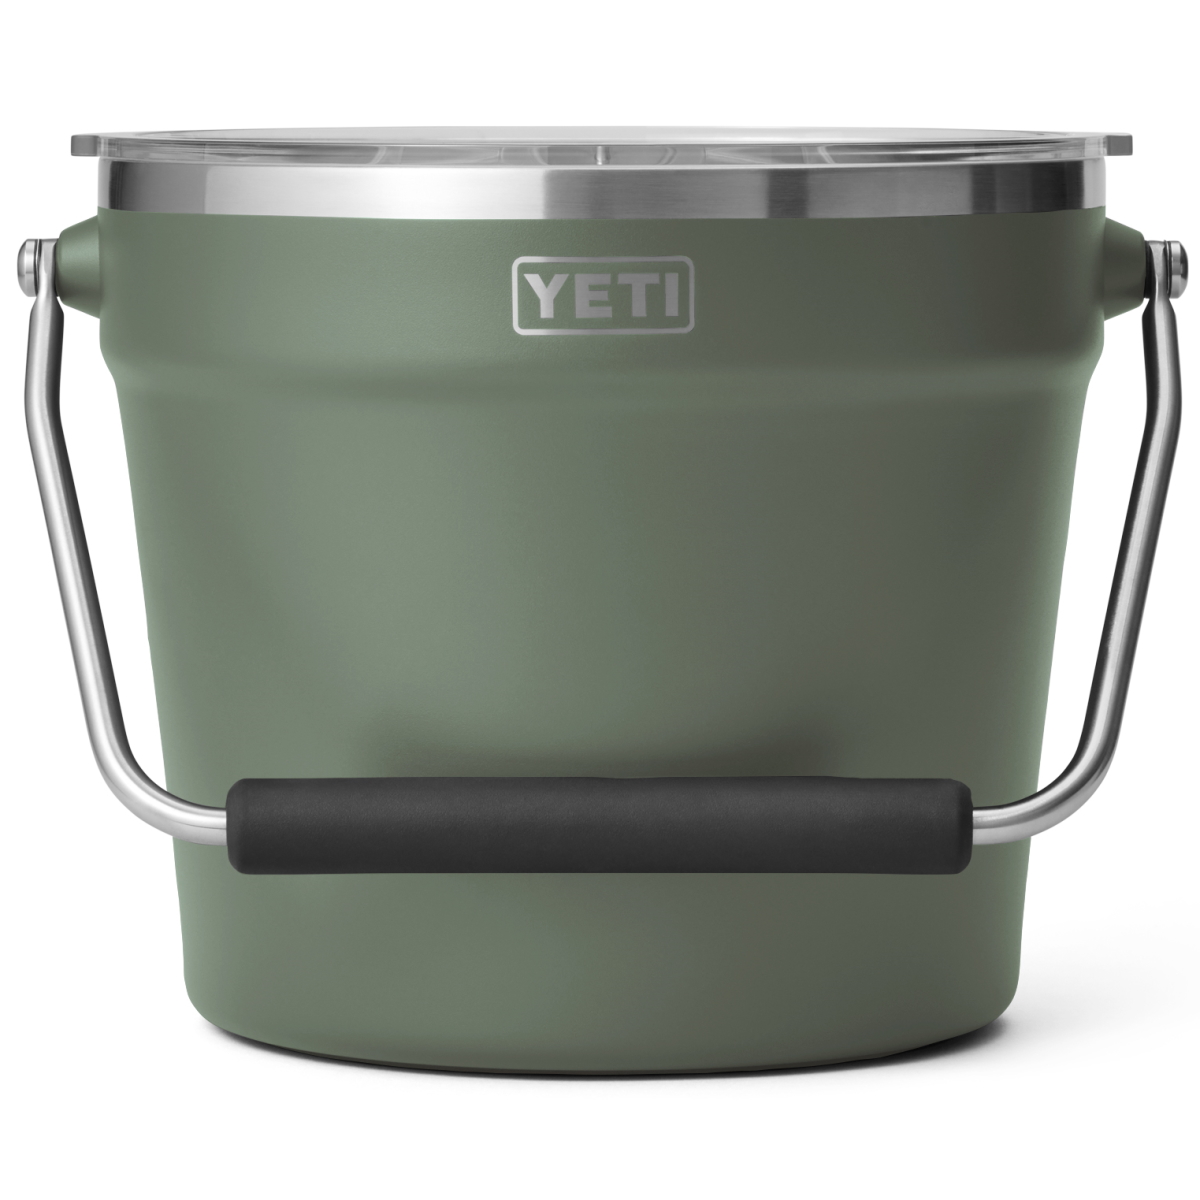 Great deal on Yeti 5 Gallon Water Jug : r/YetiCoolers